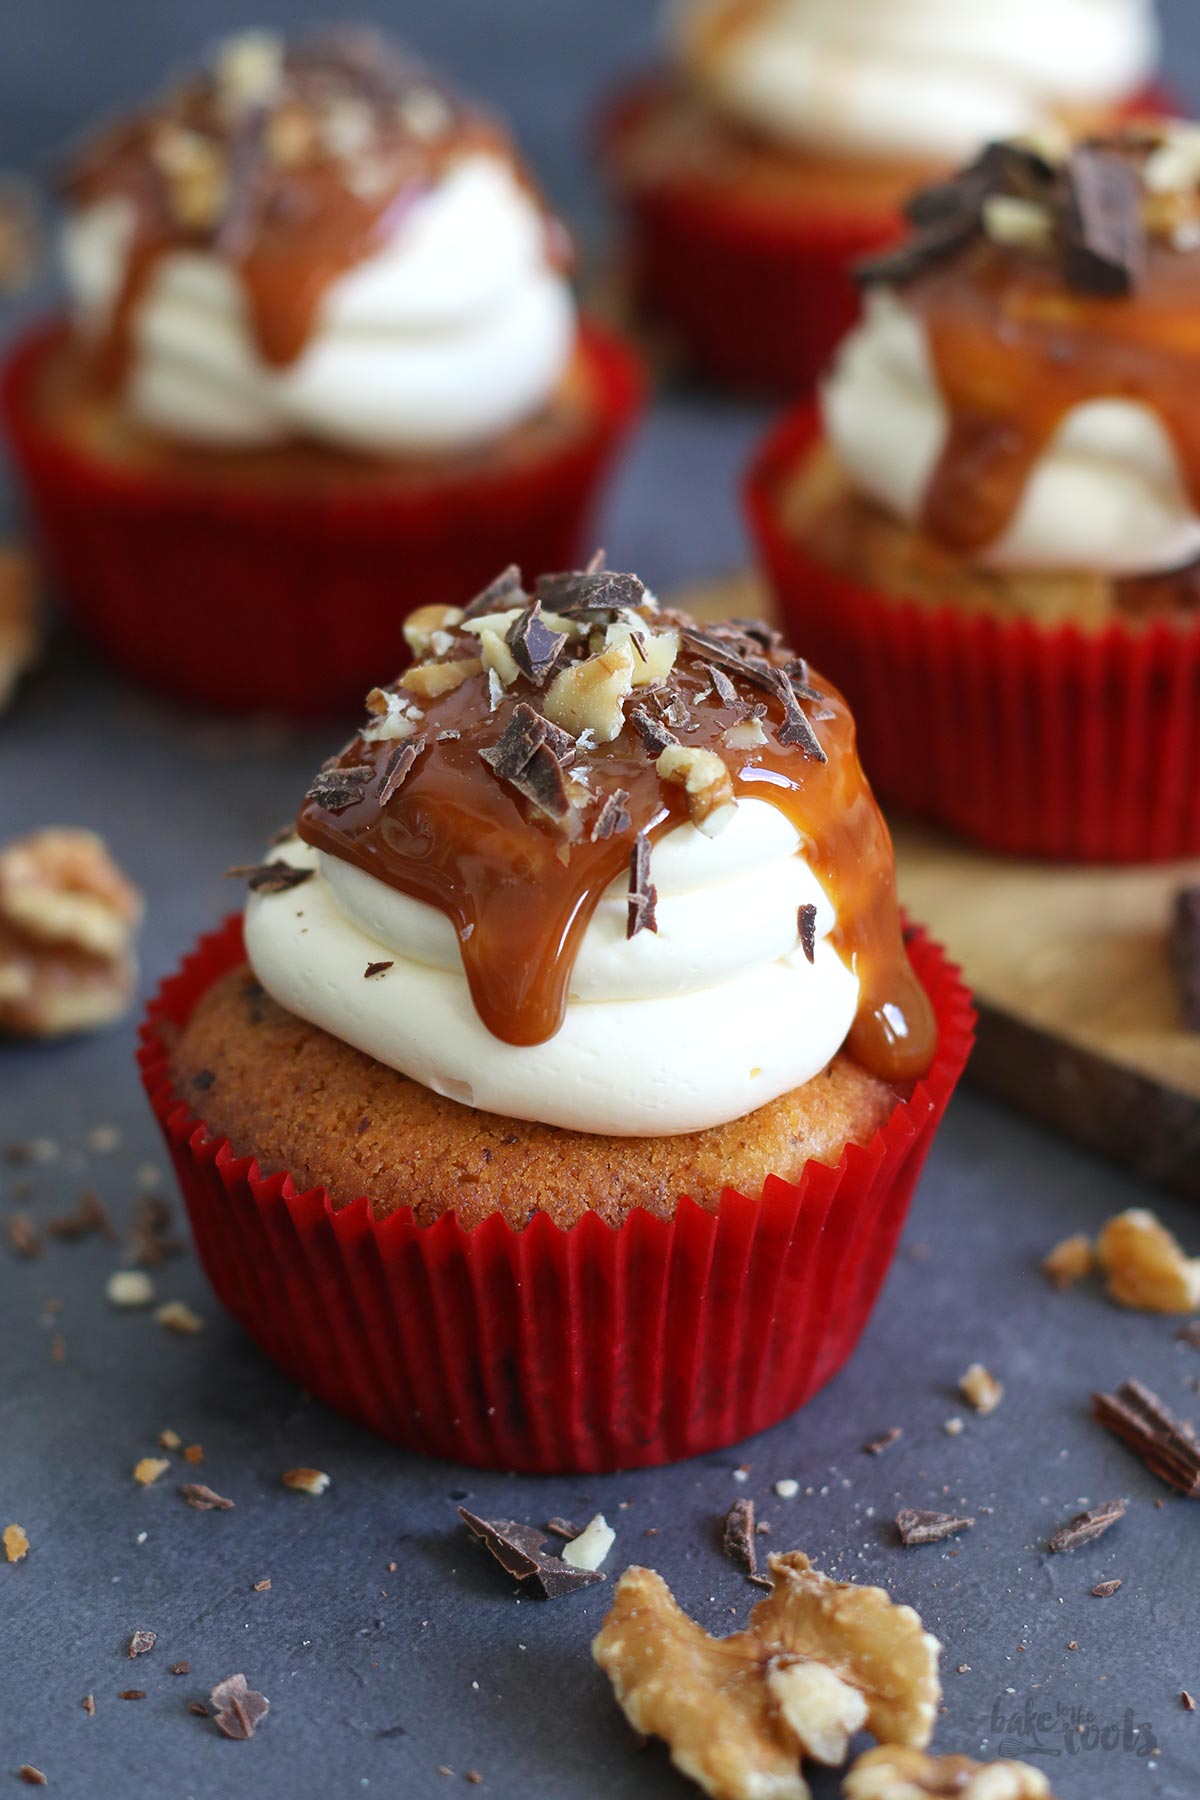 Walnut Chocolate Cupcakes | Bake to the roots